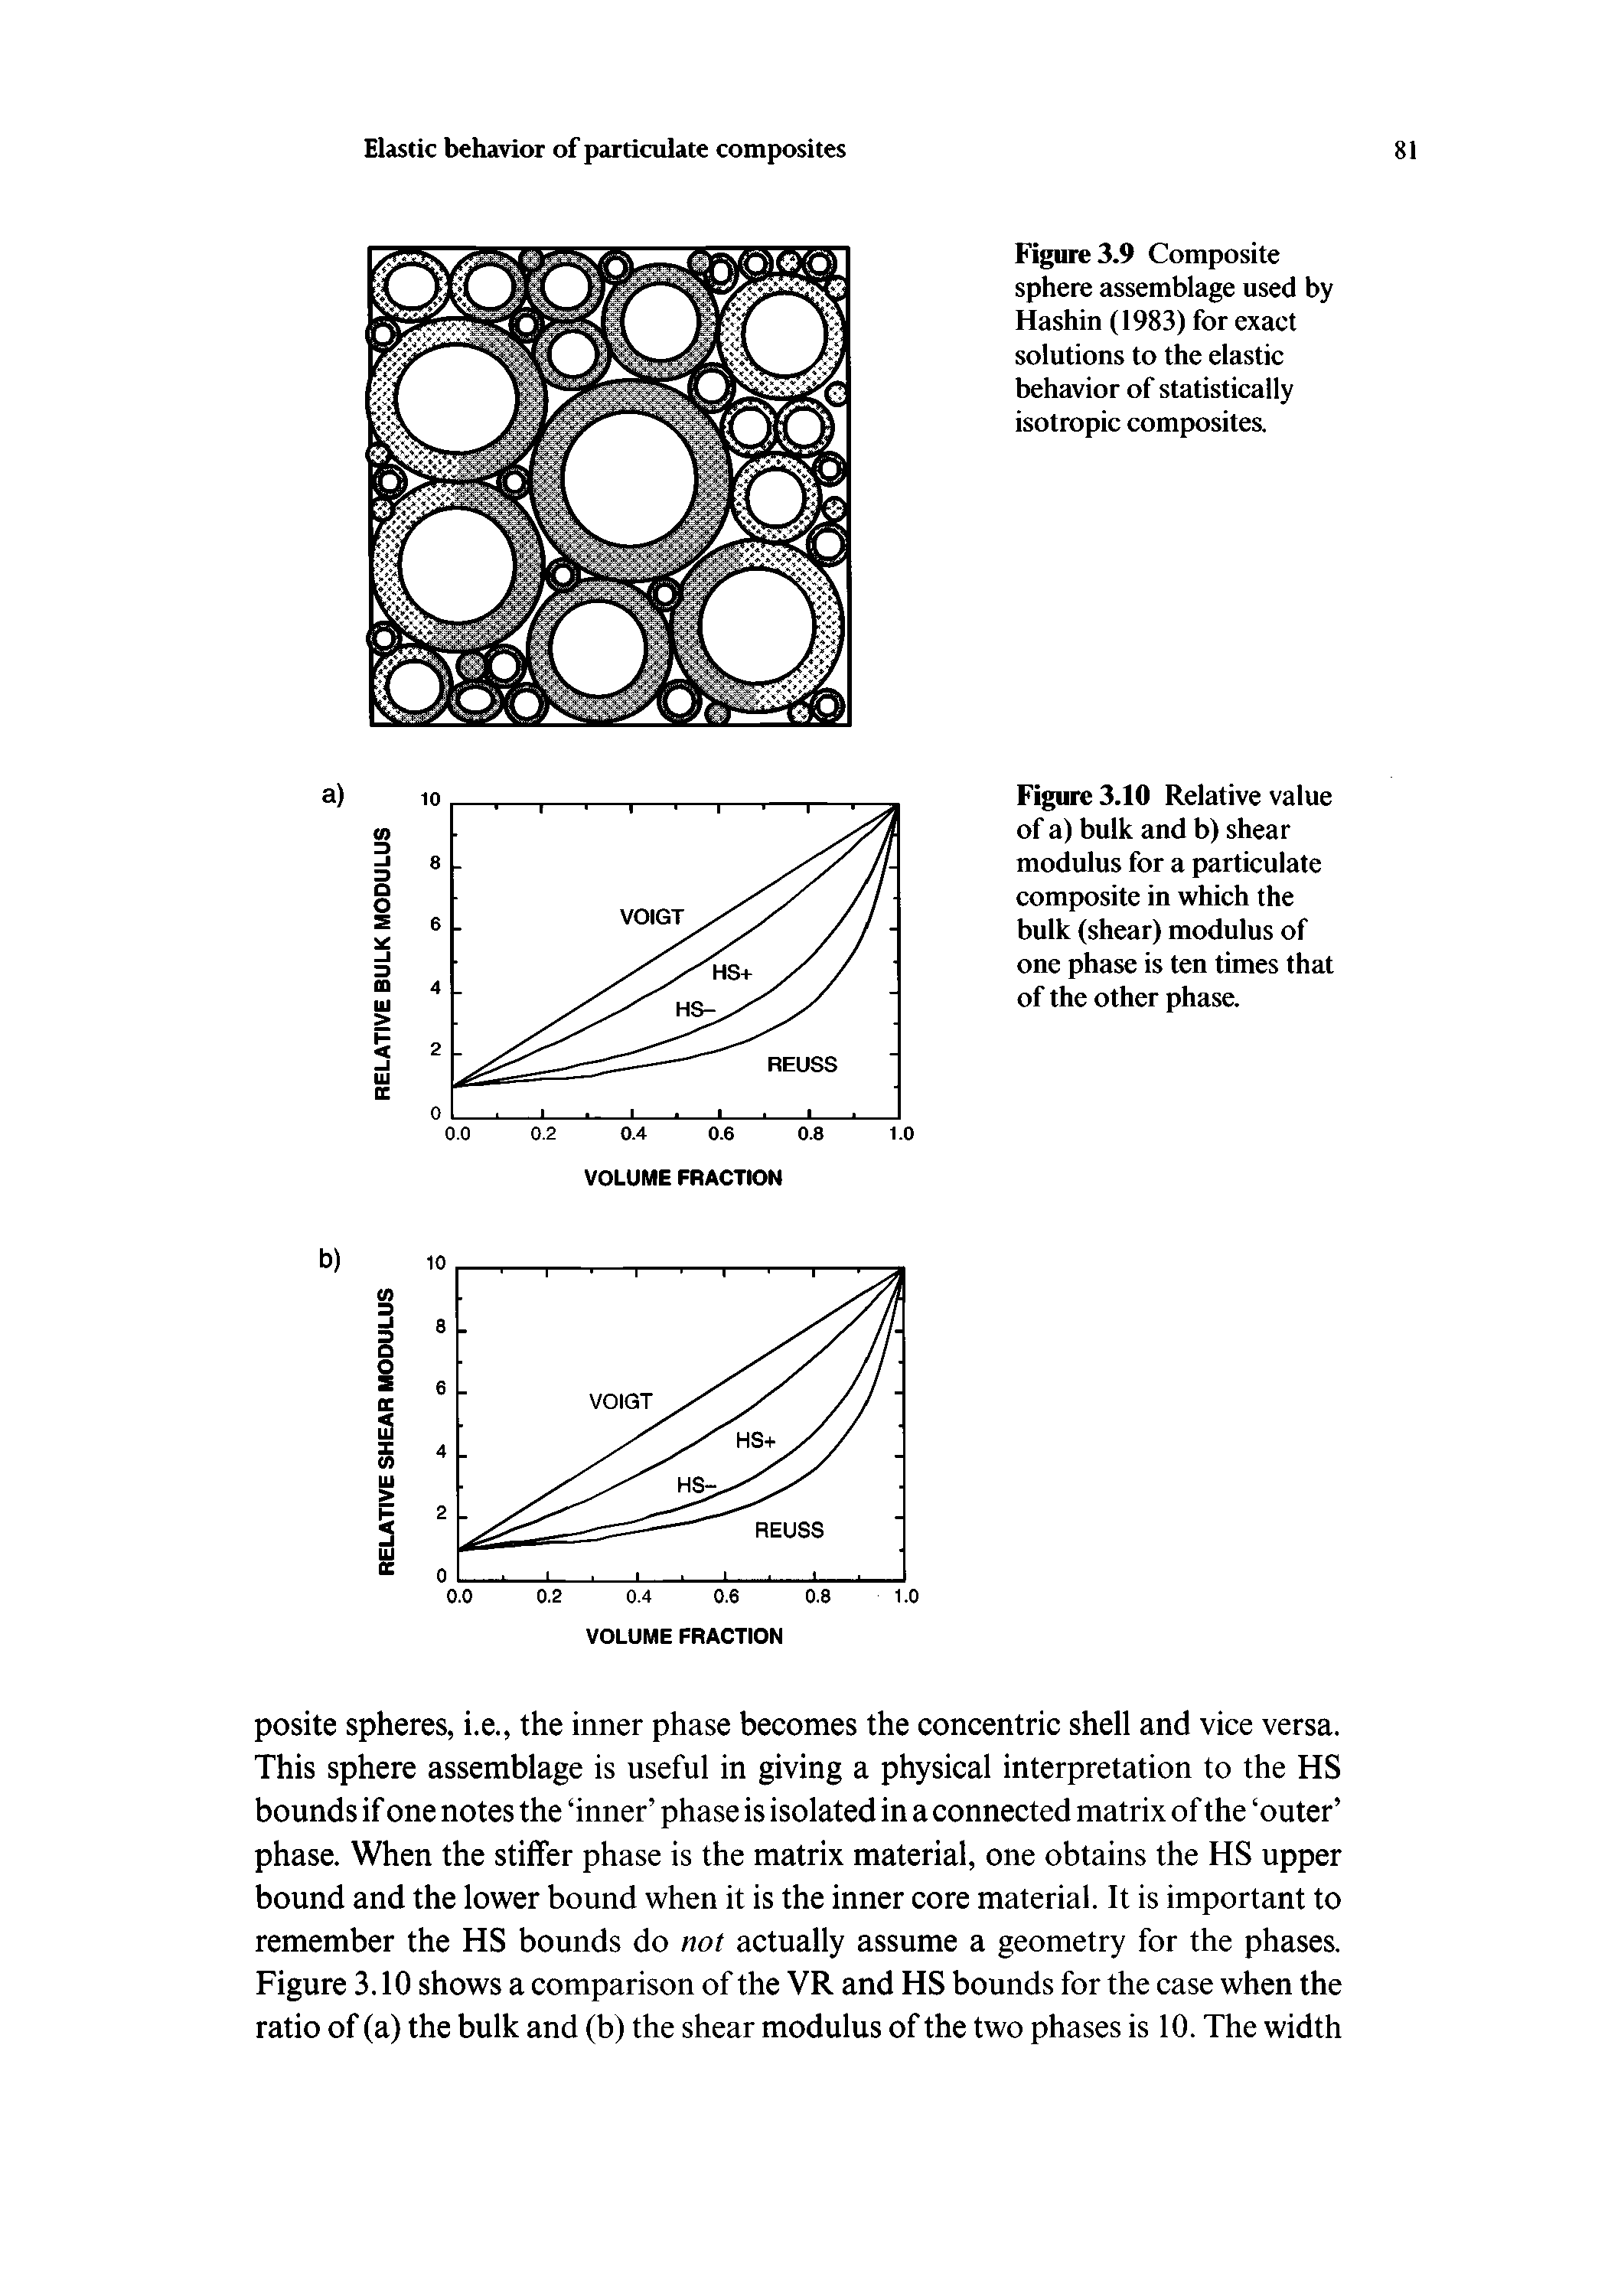 Figure 3.9 Composite sphere assemblage used by Hashin (1983) for exact solutions to the elastic behavior of statistically isotropic composites.